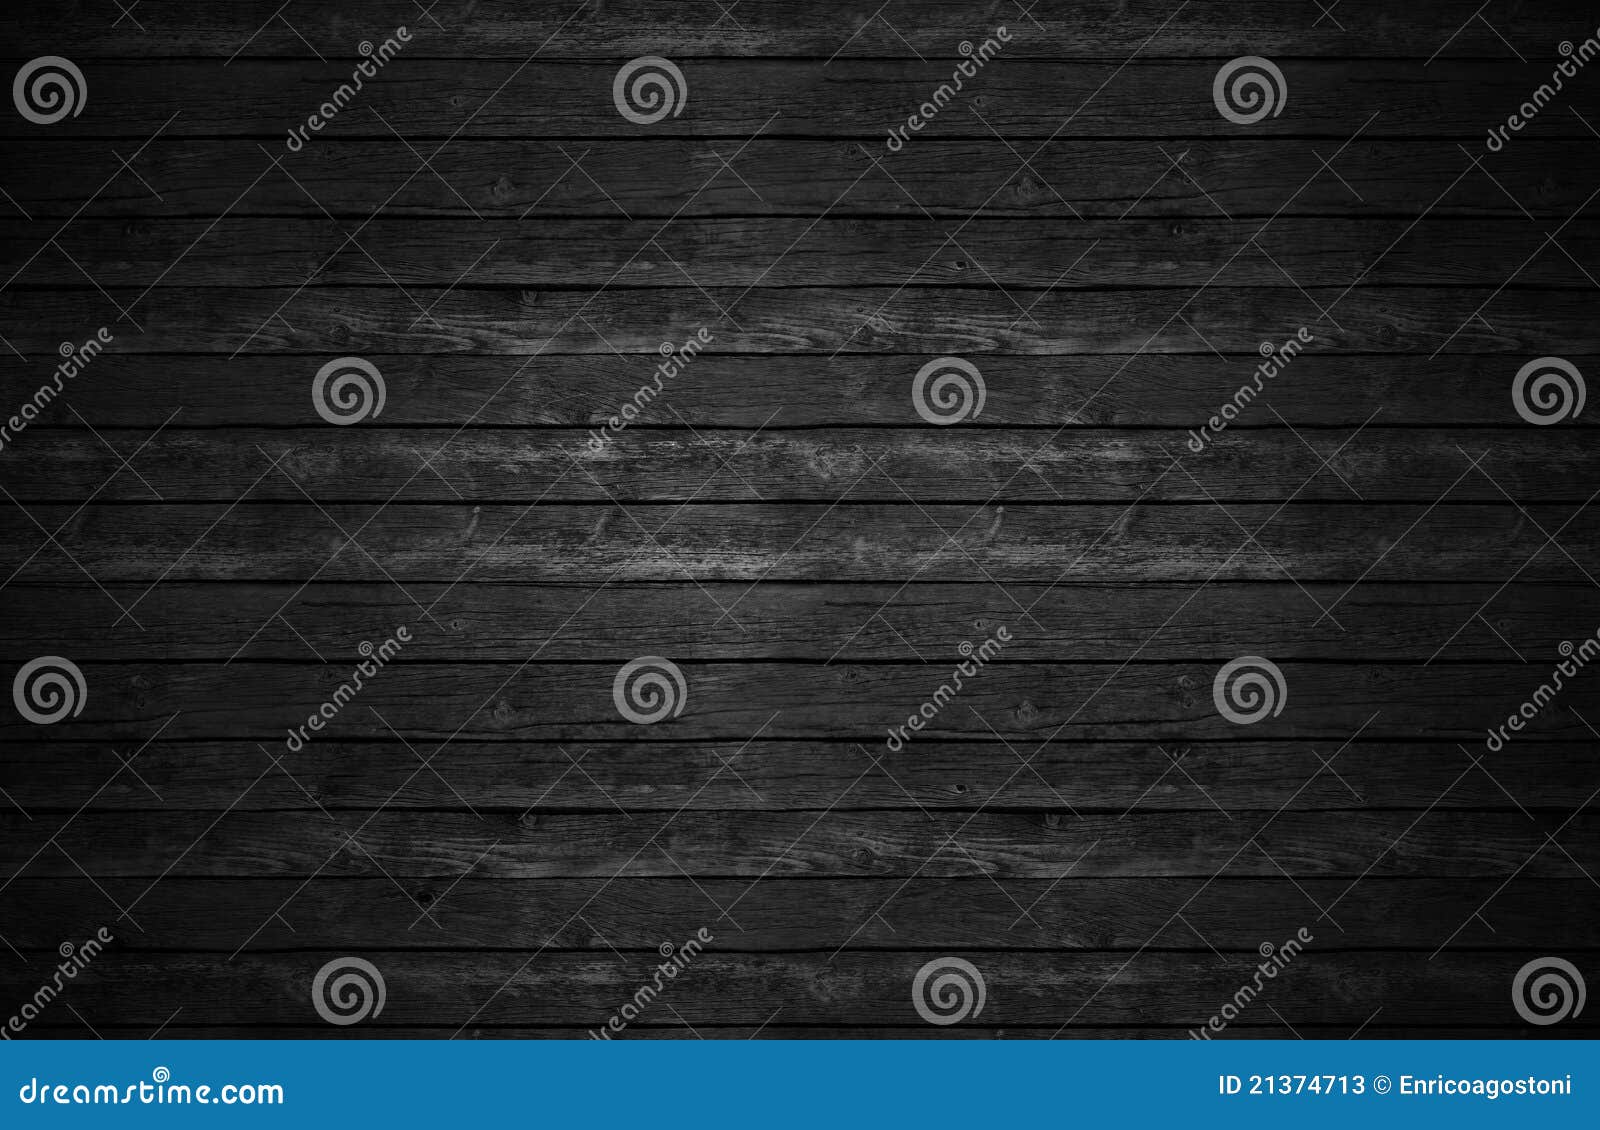 dark and aged wood textures